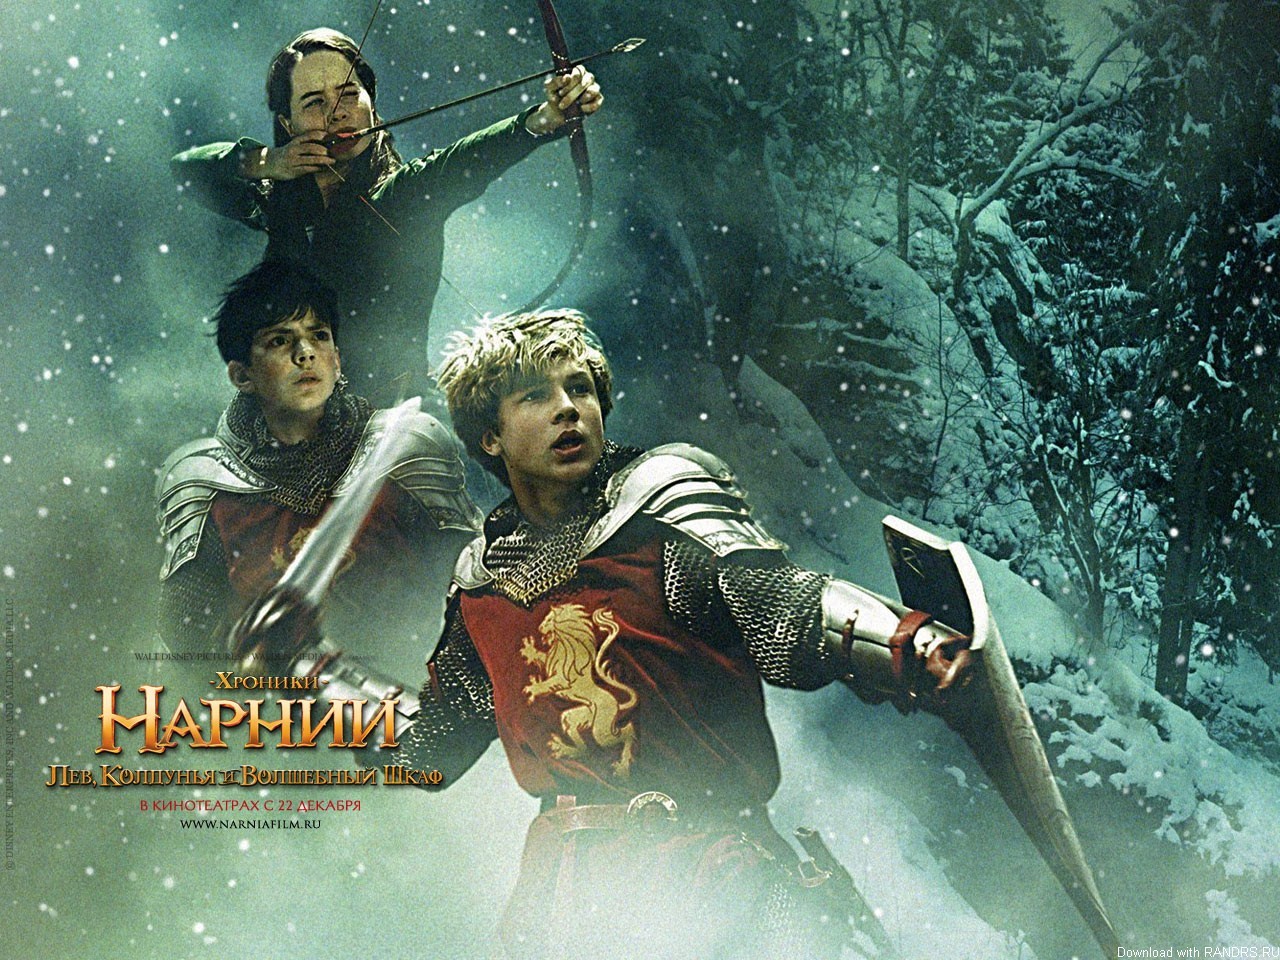 Best Chronicles Of Narnia phone Wallpapers